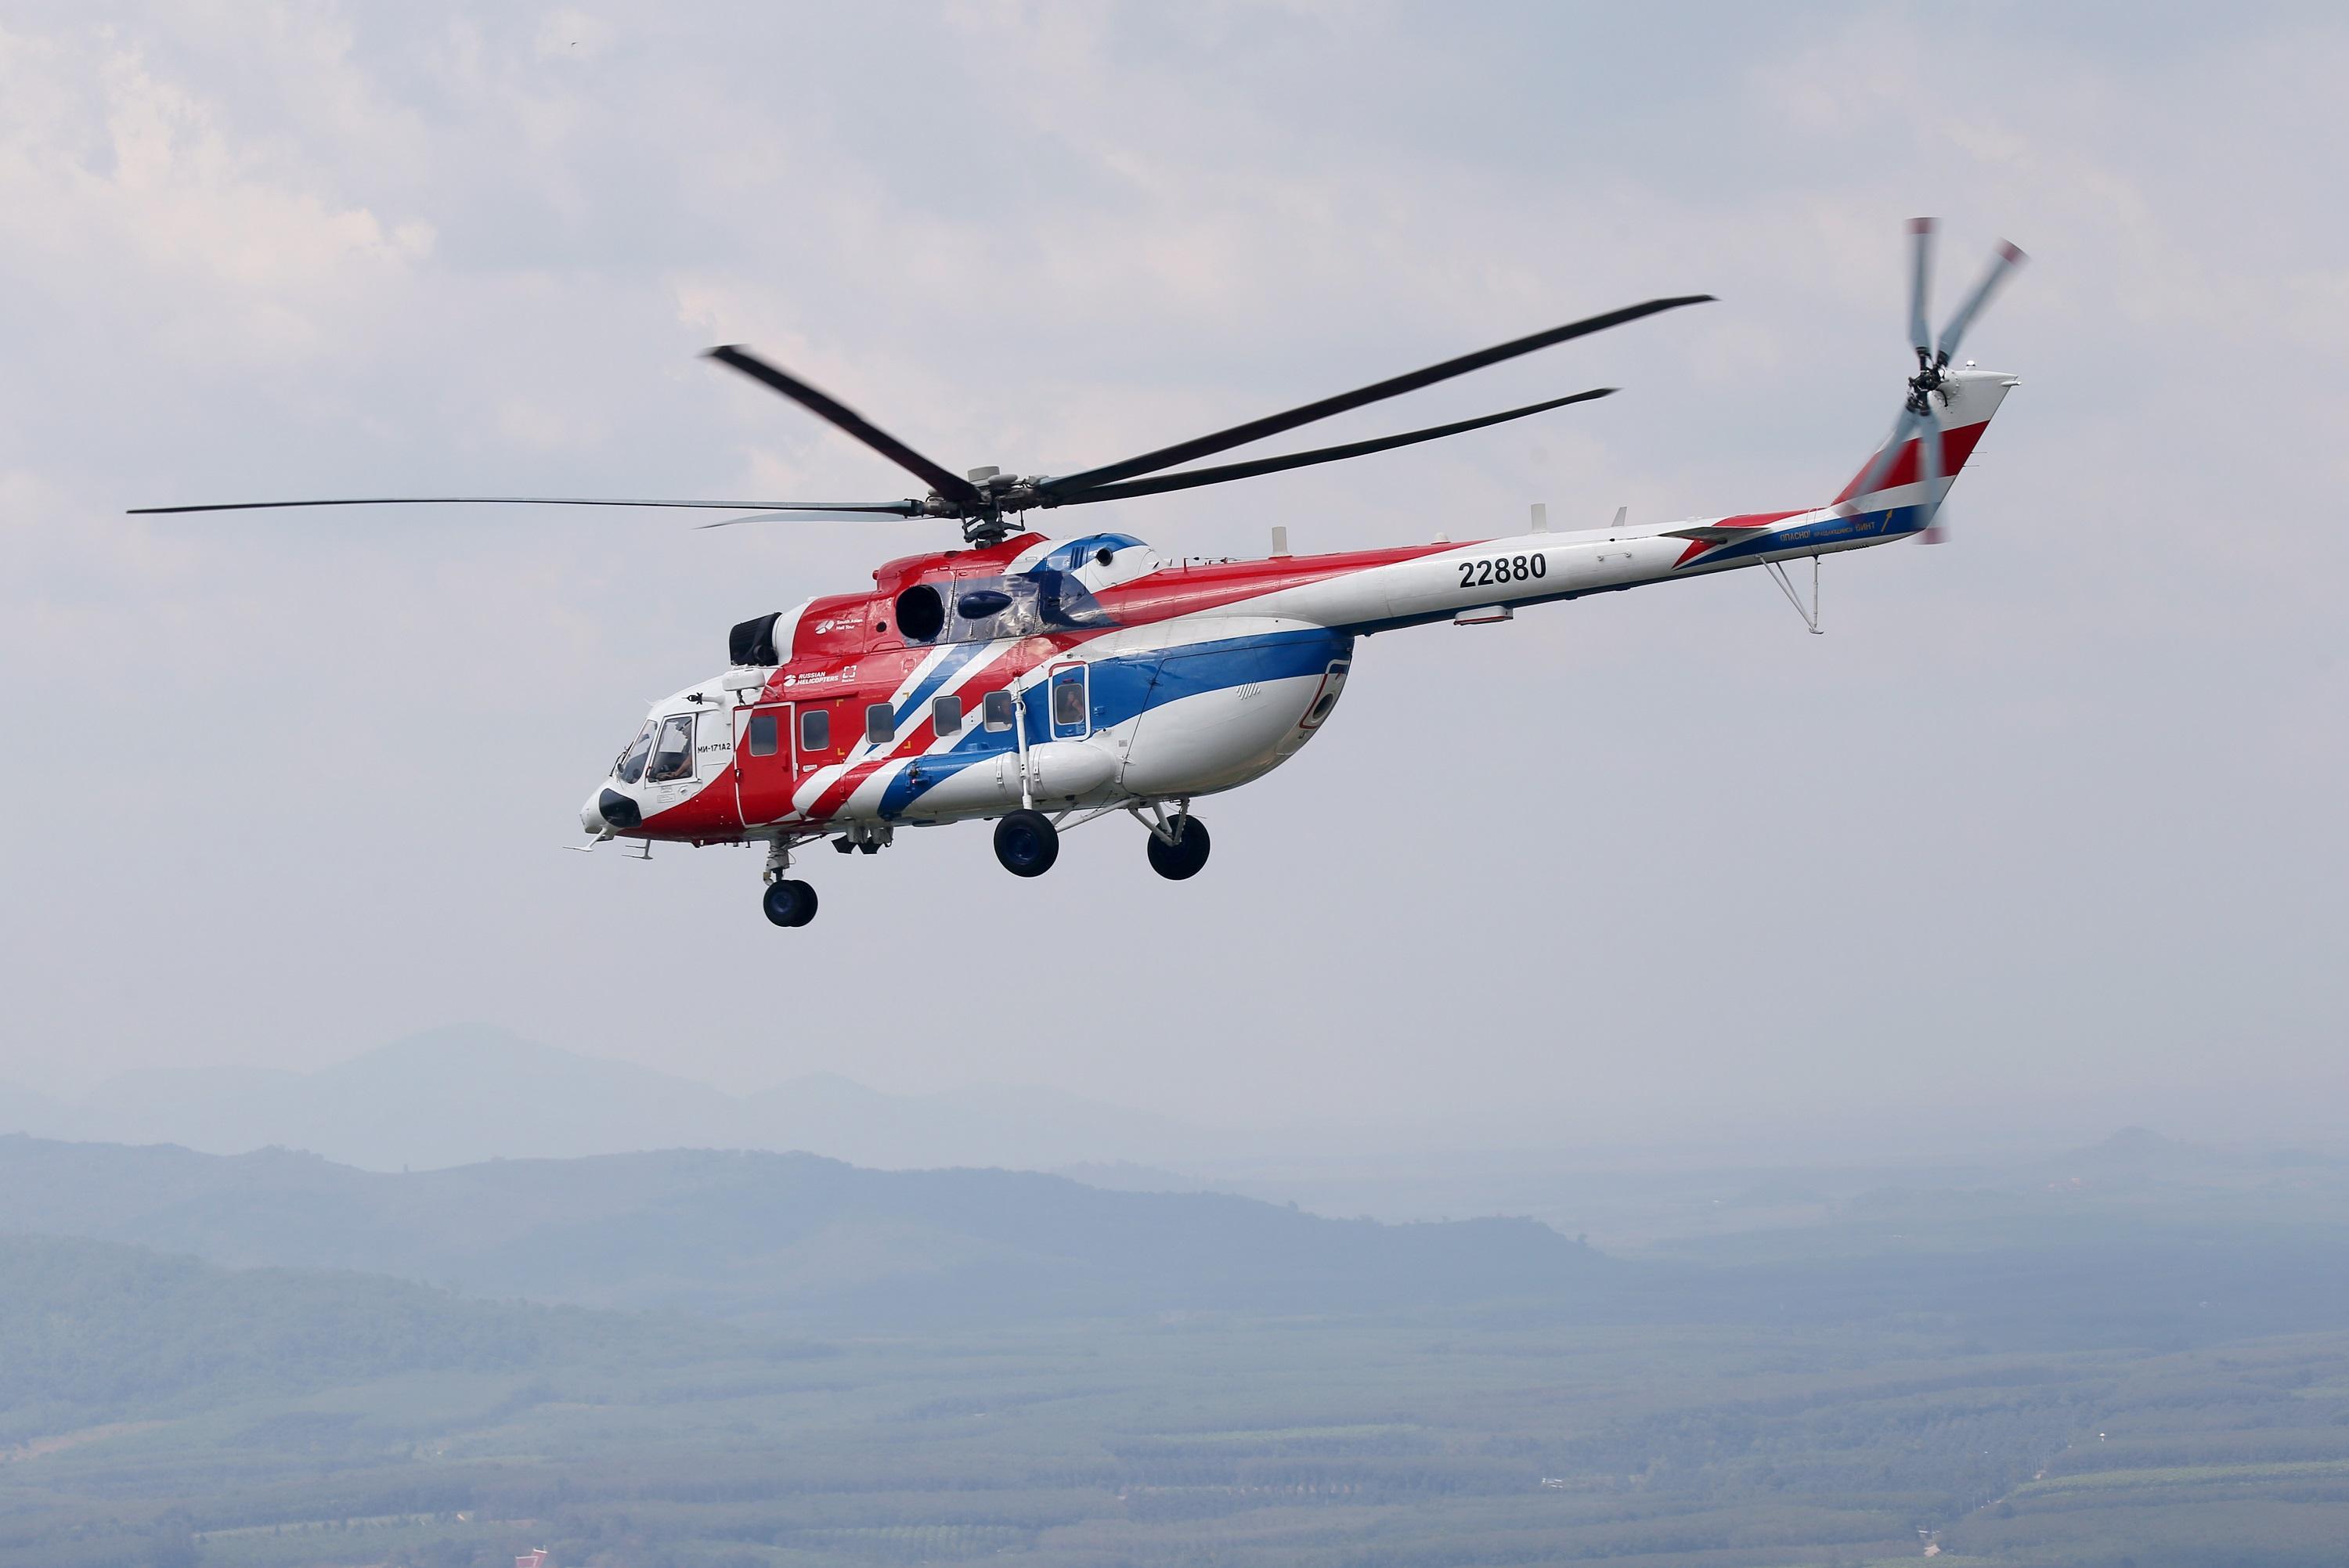 Pilots from Kazakhstan Improve Skills on the Mi-171A2 Helicopter in Ulan-Ude